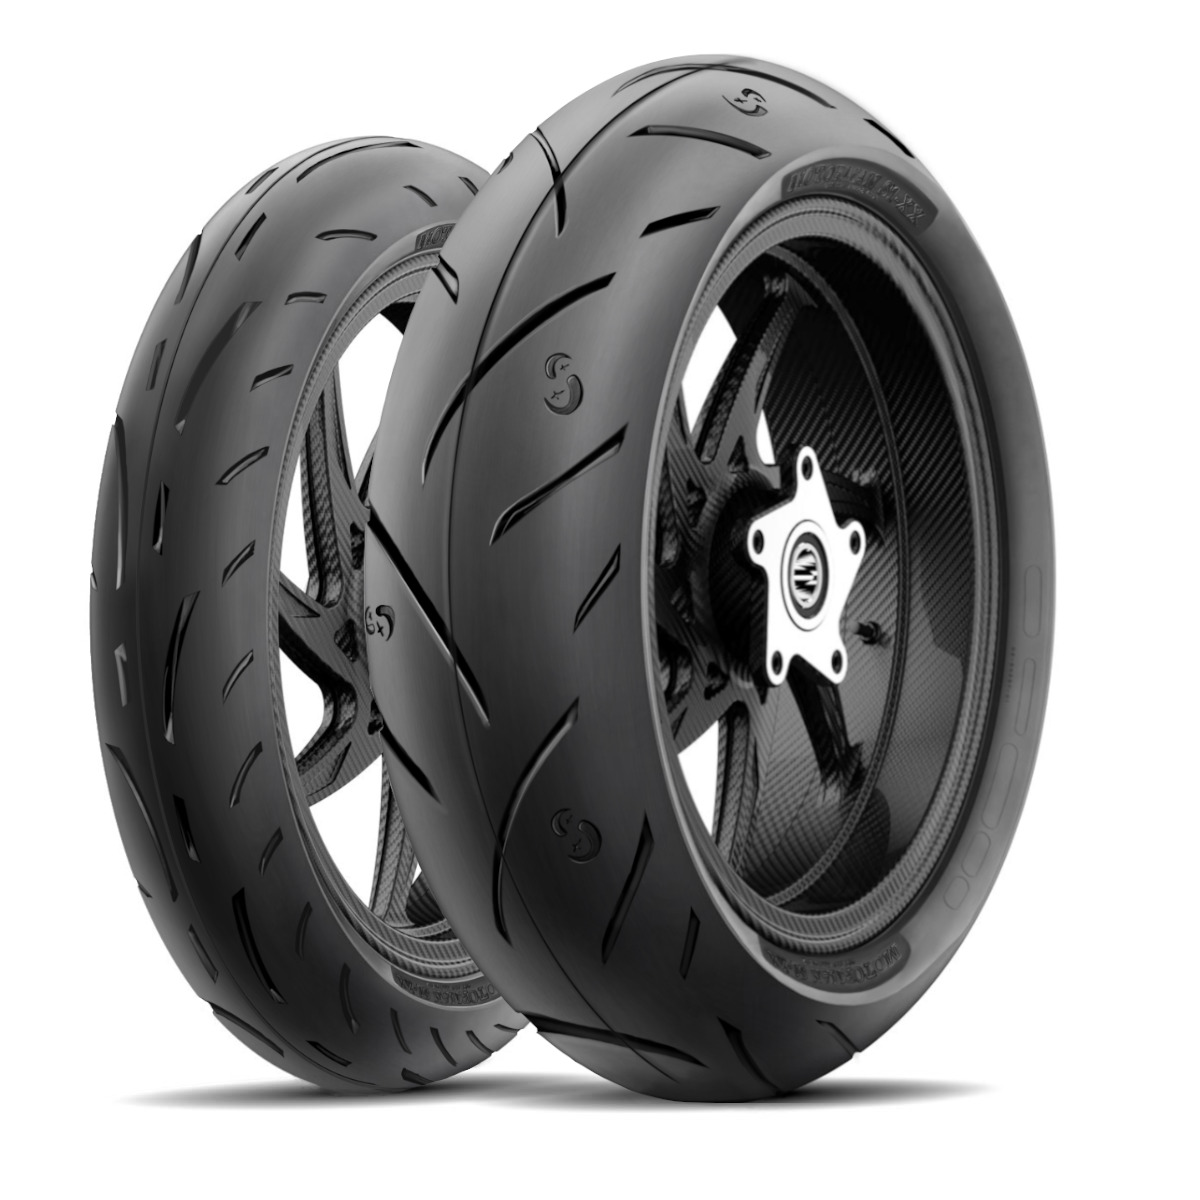 190/50-17 + 120/70-17 MMT® Motorcycle Tire SET 190/50ZR17 + 120/70-17 (2 TIRES)